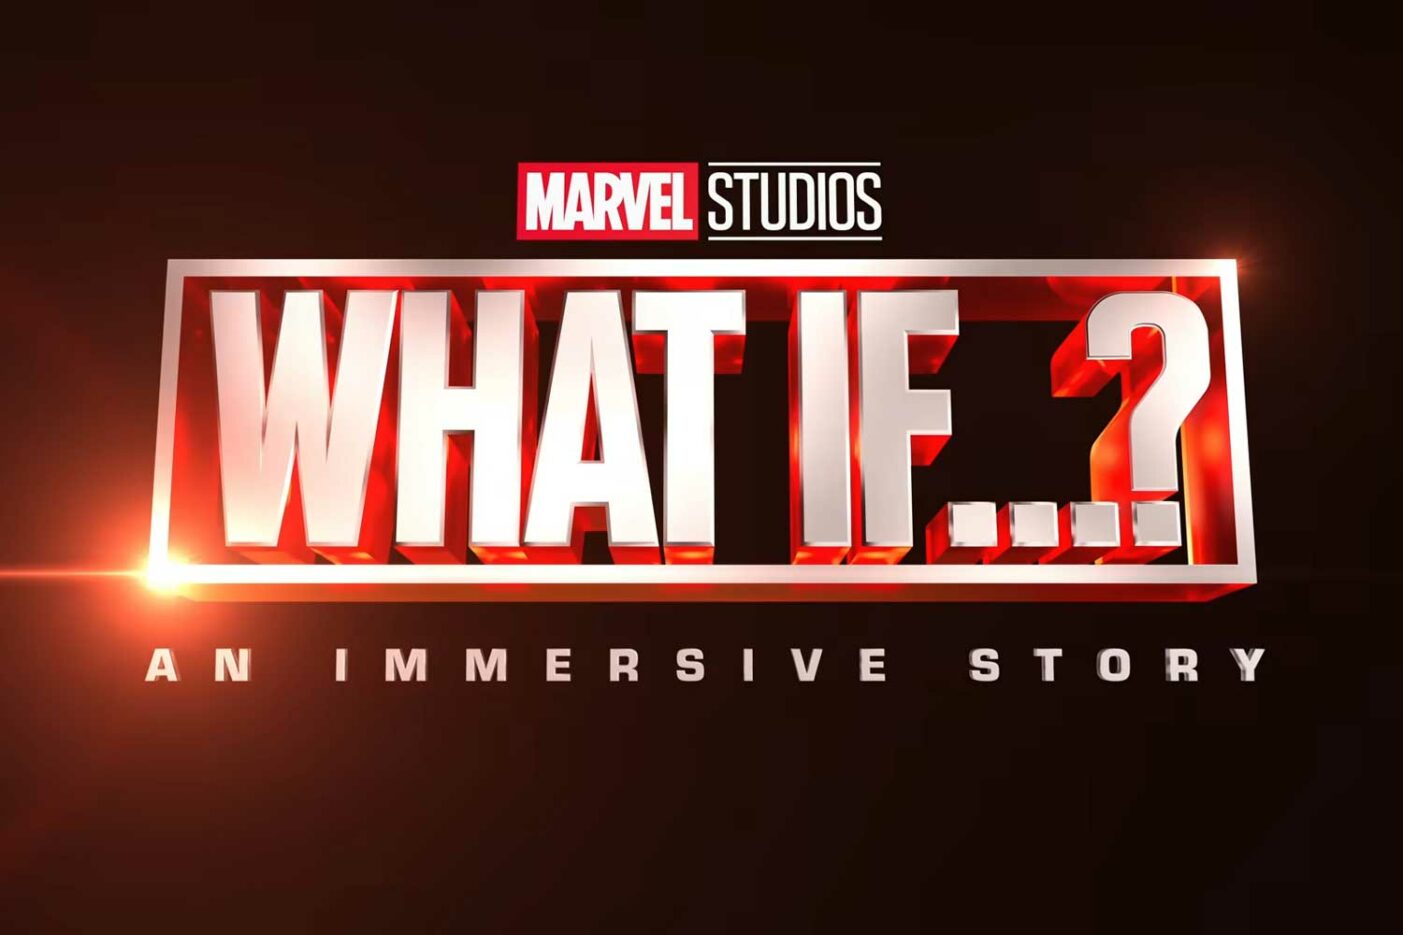 Marvel Studios What If A Nimmersive Story